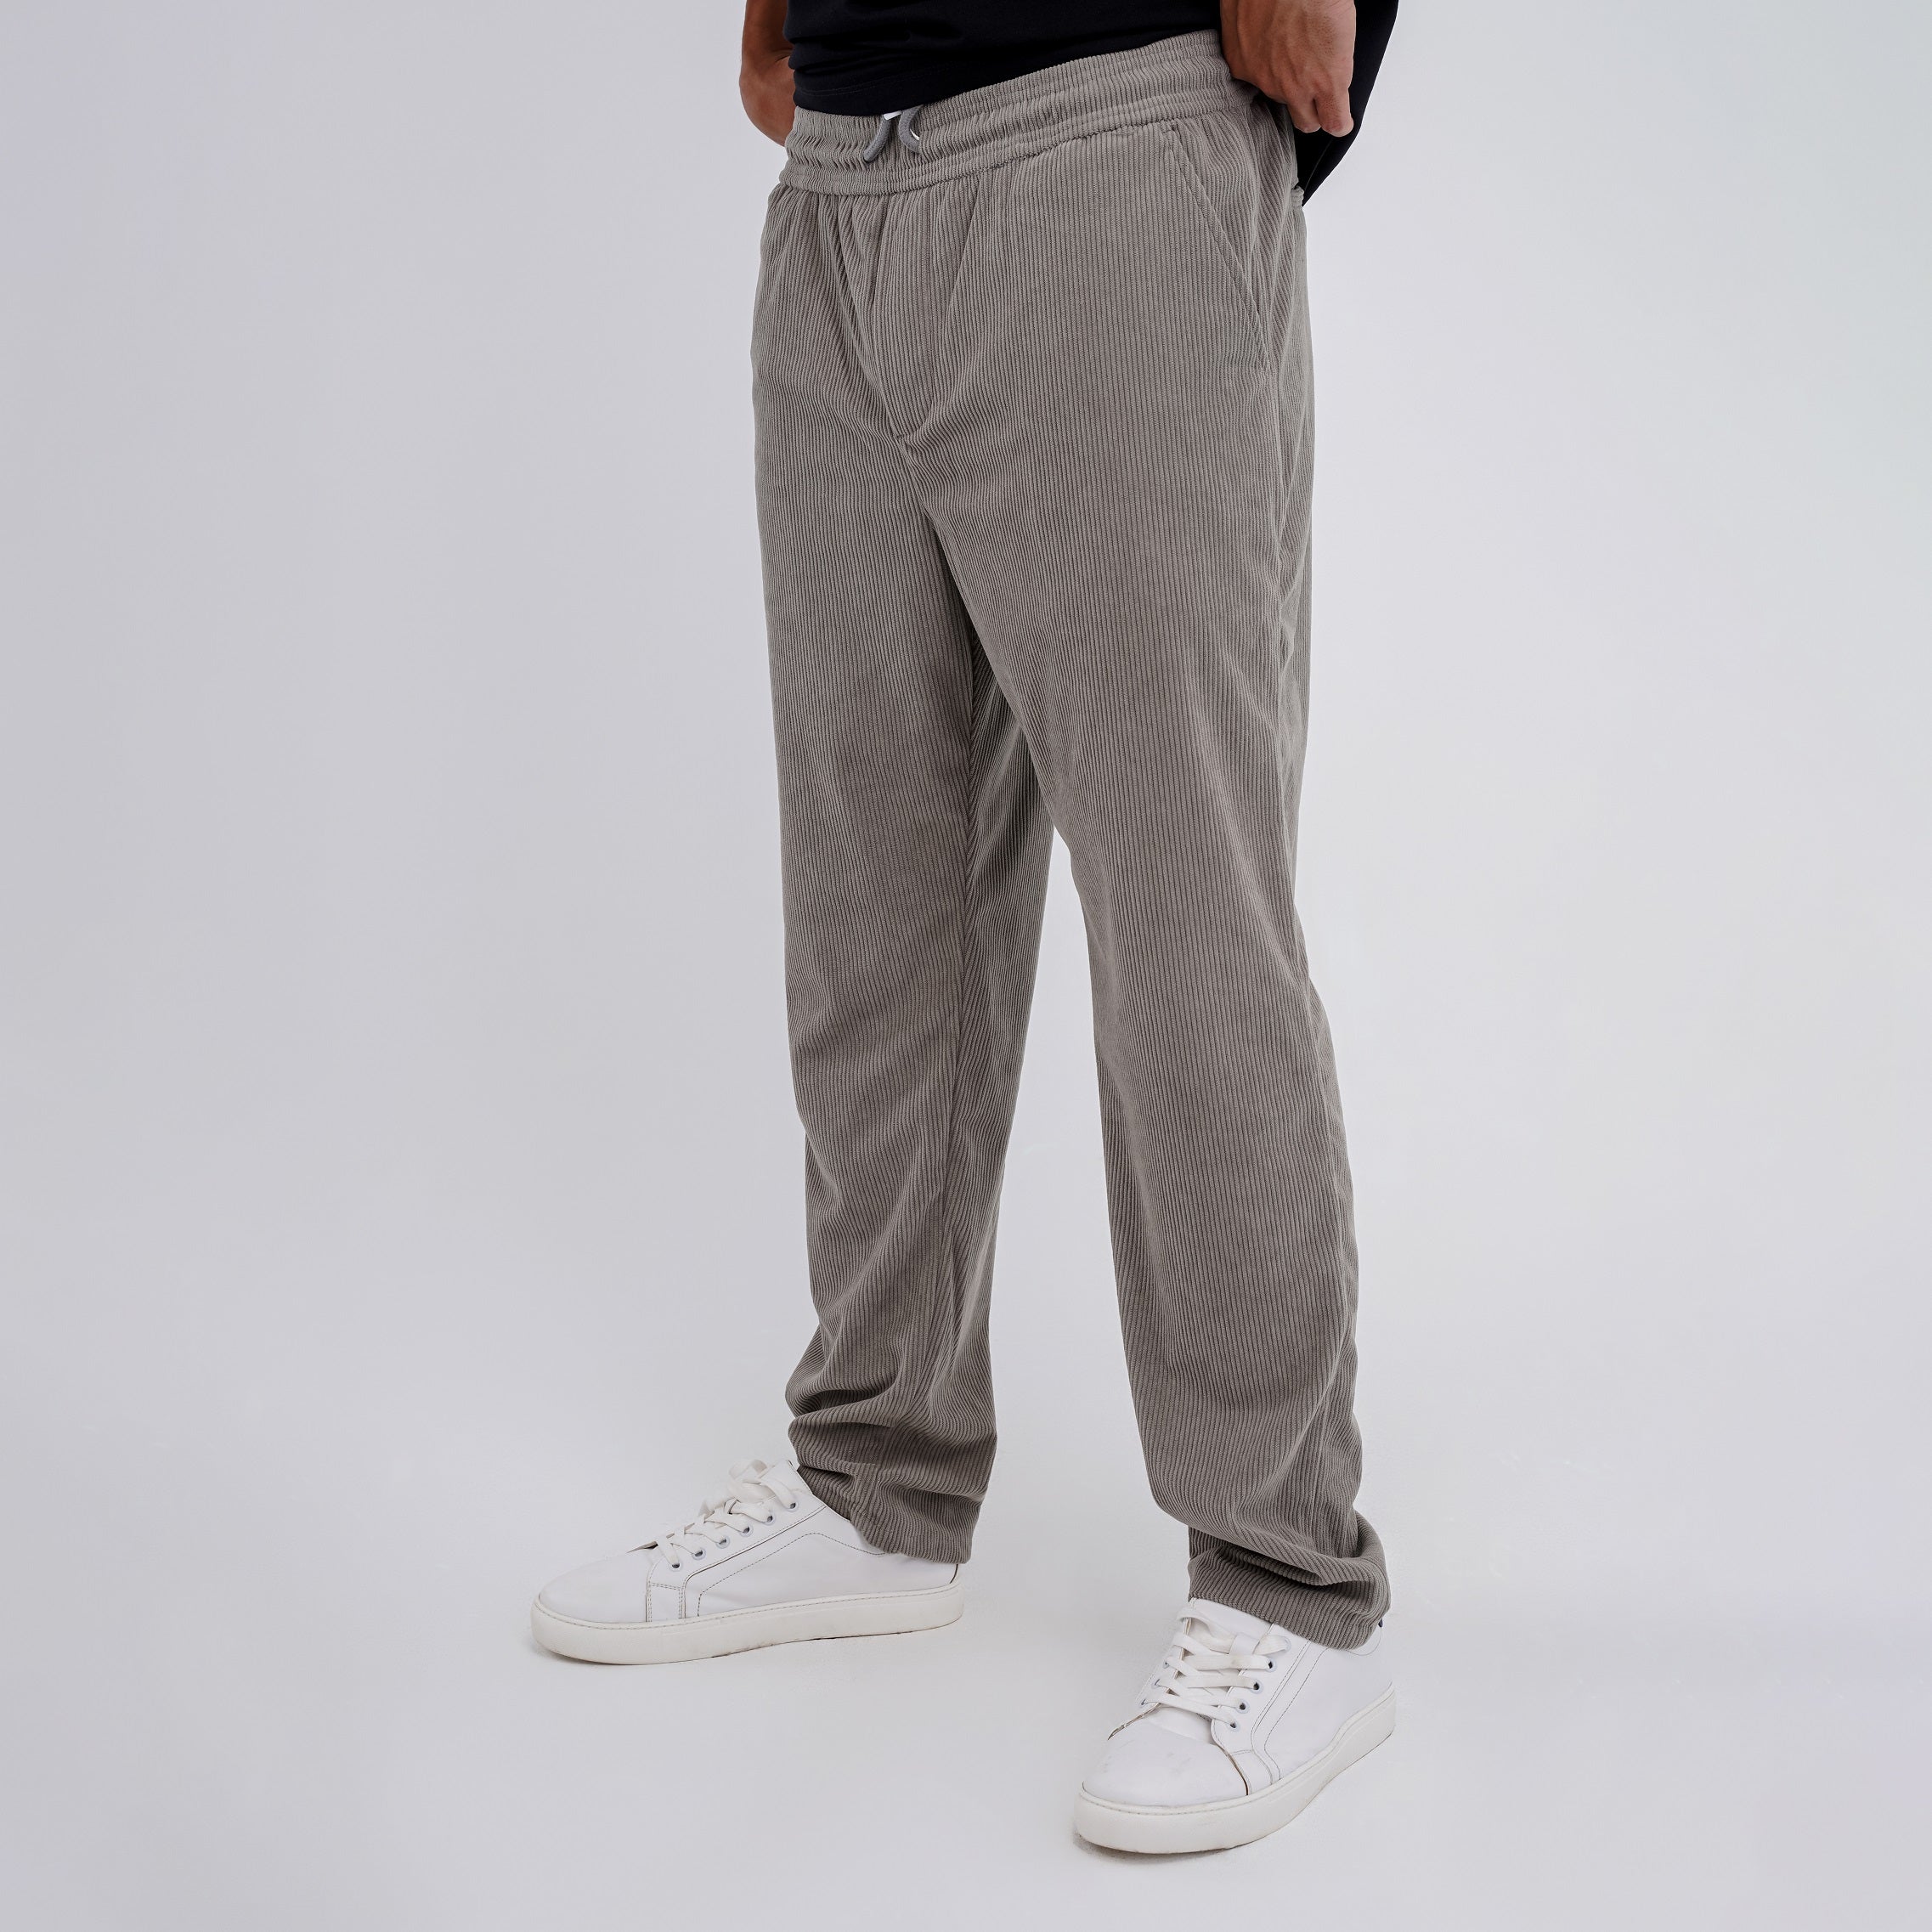 M24NT725-Sporty Sweatpants With drawstring